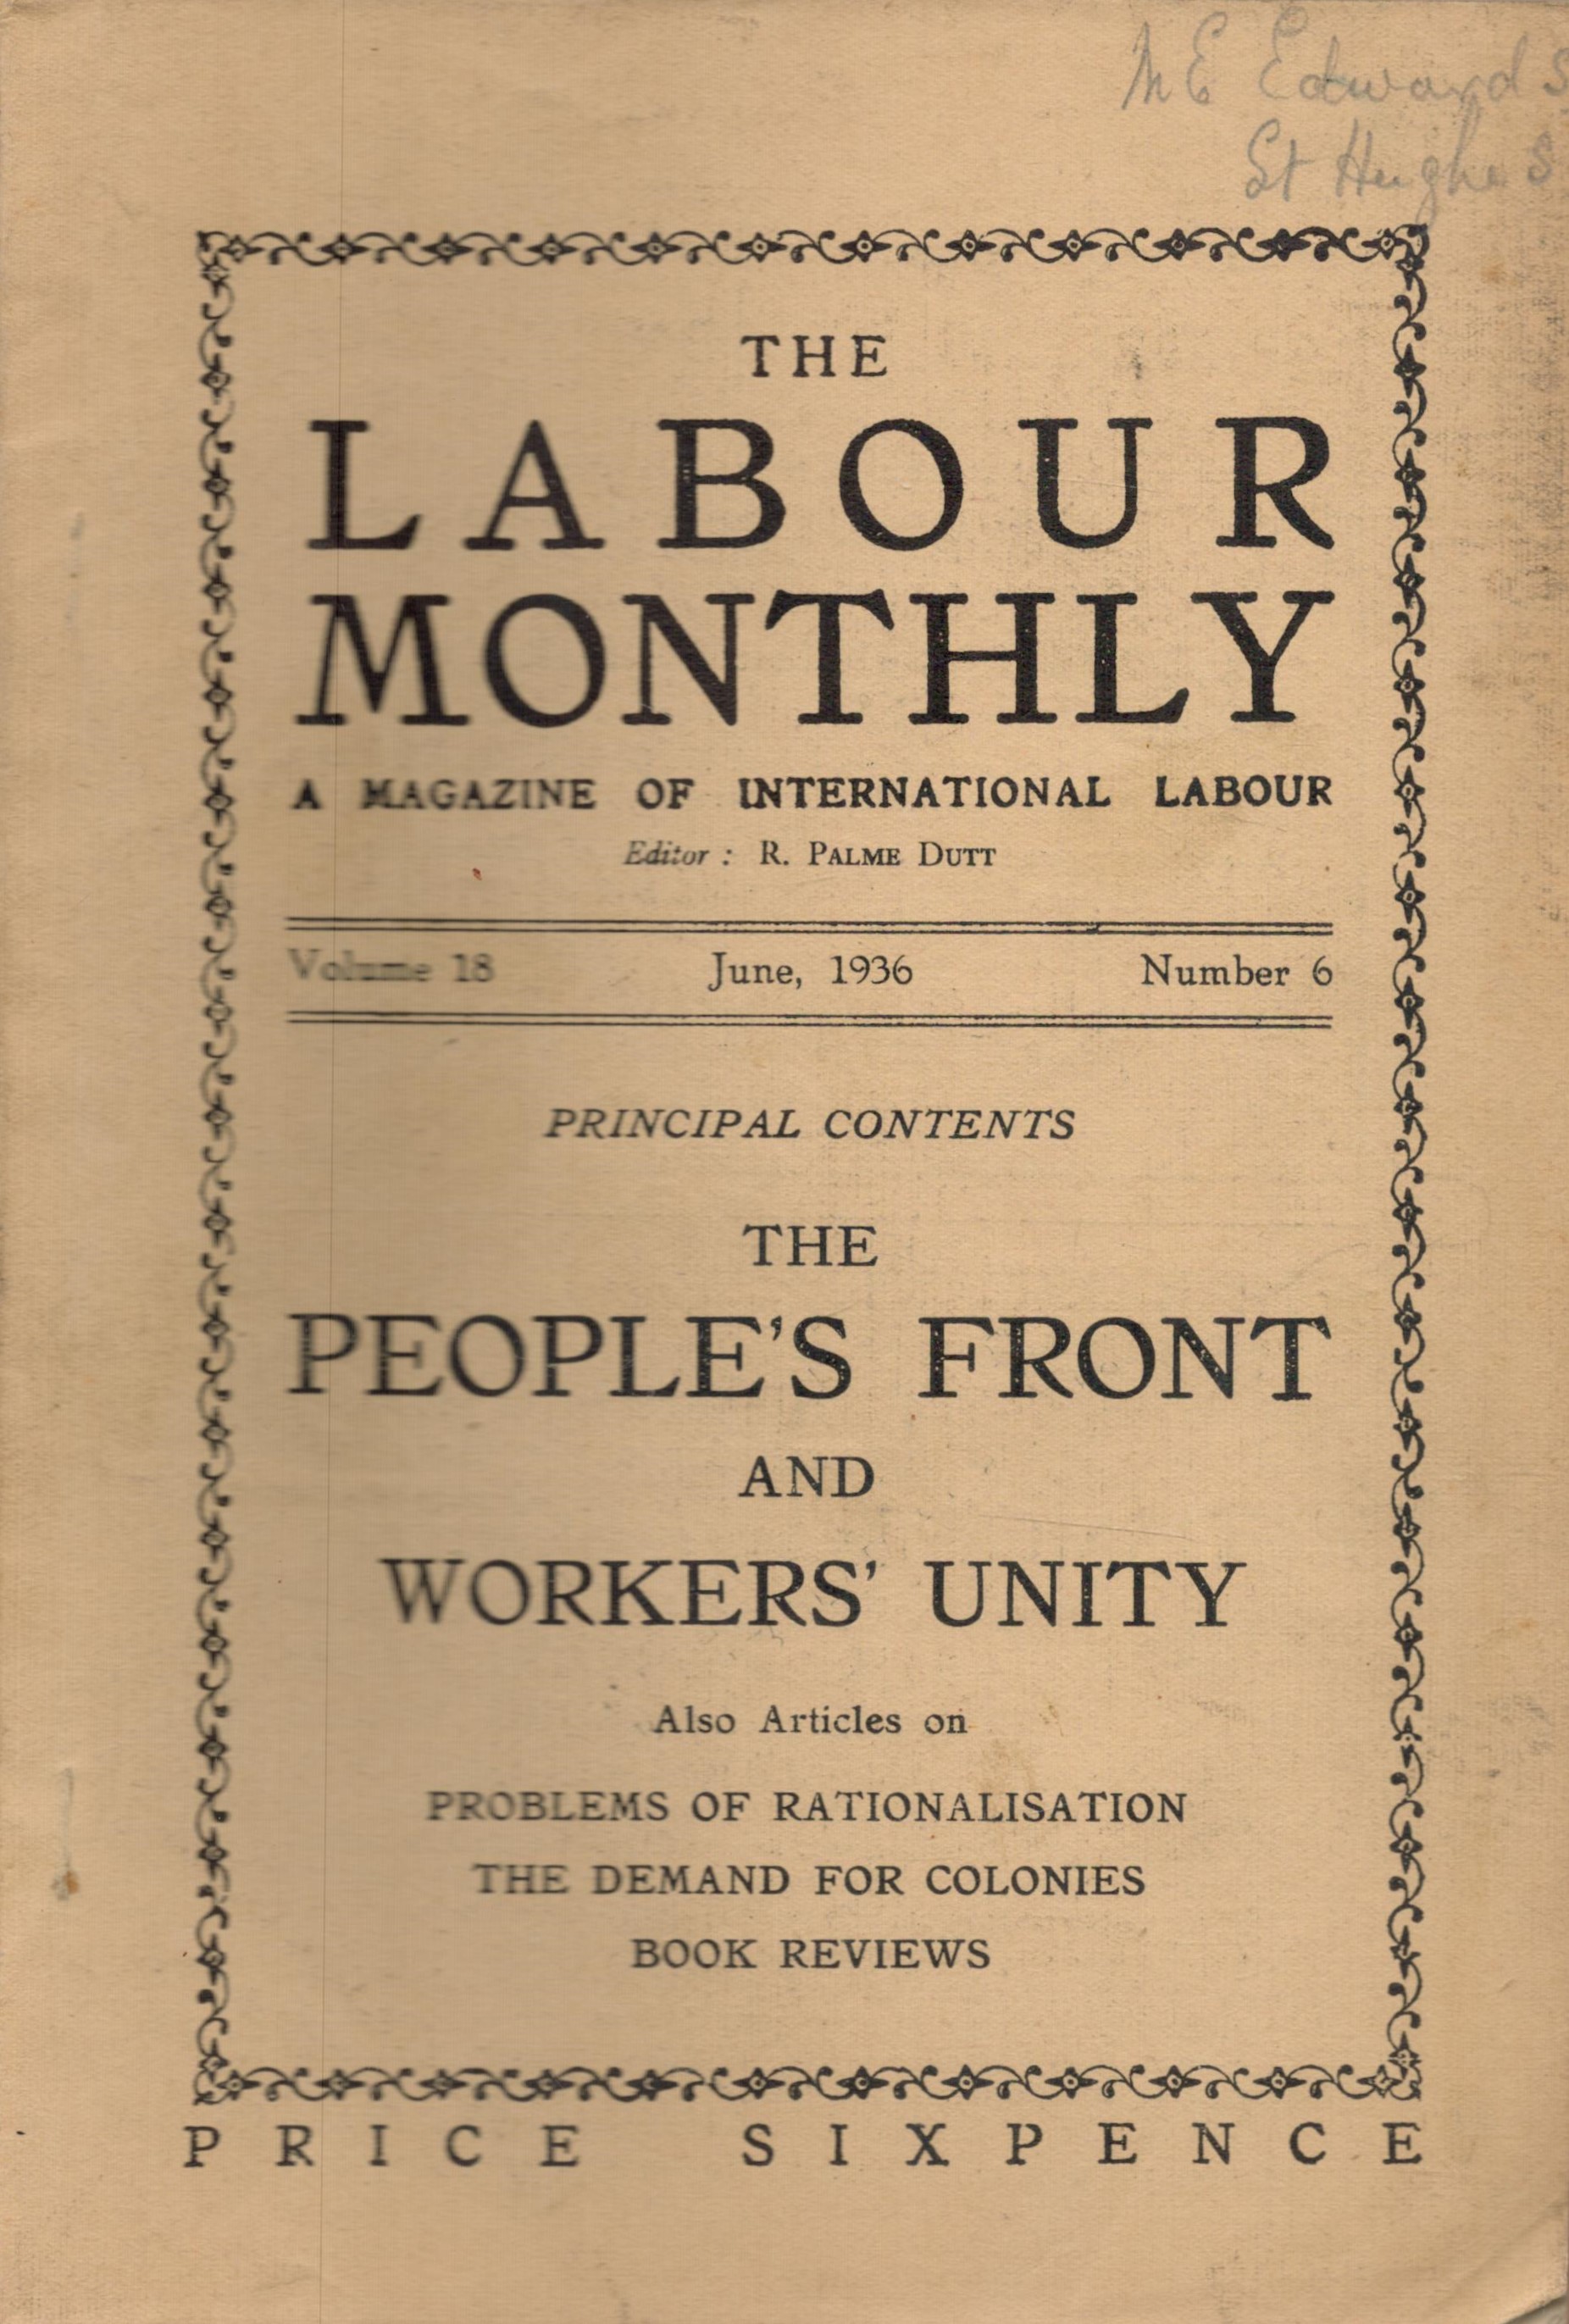 Labour Monthly Journal 1946. A magazine of International Labour. Very good condition in publisher'